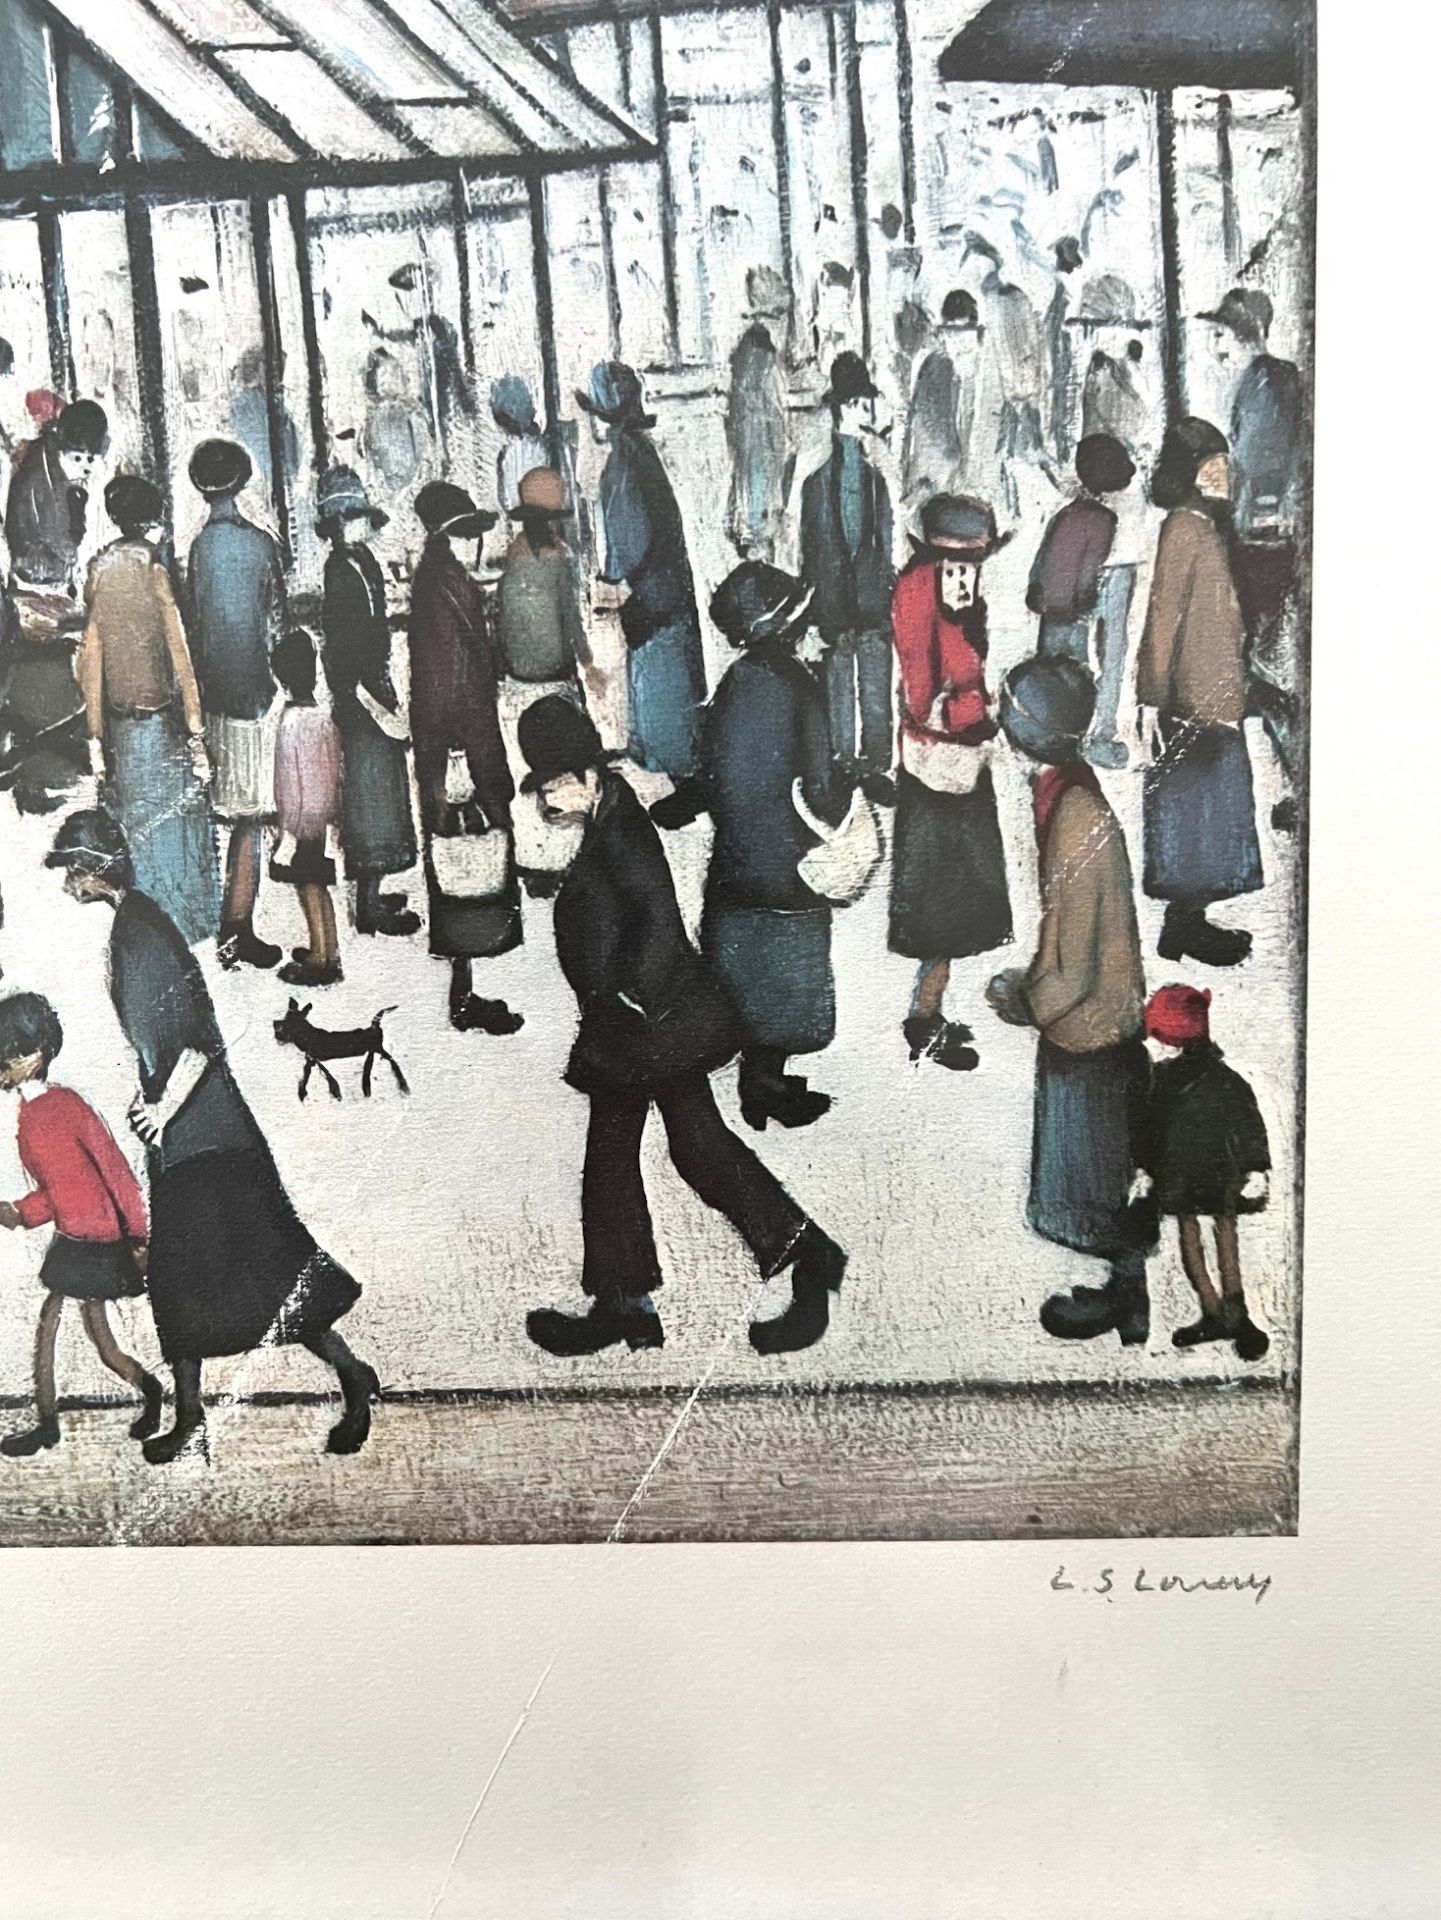 LS LOWRY, 'MARKET SCENE IN A NORTHERN TOWN', PUB PATRICK SEALE, PENCIL SIGNED LOWER RIGHT LONDON, - Image 2 of 3